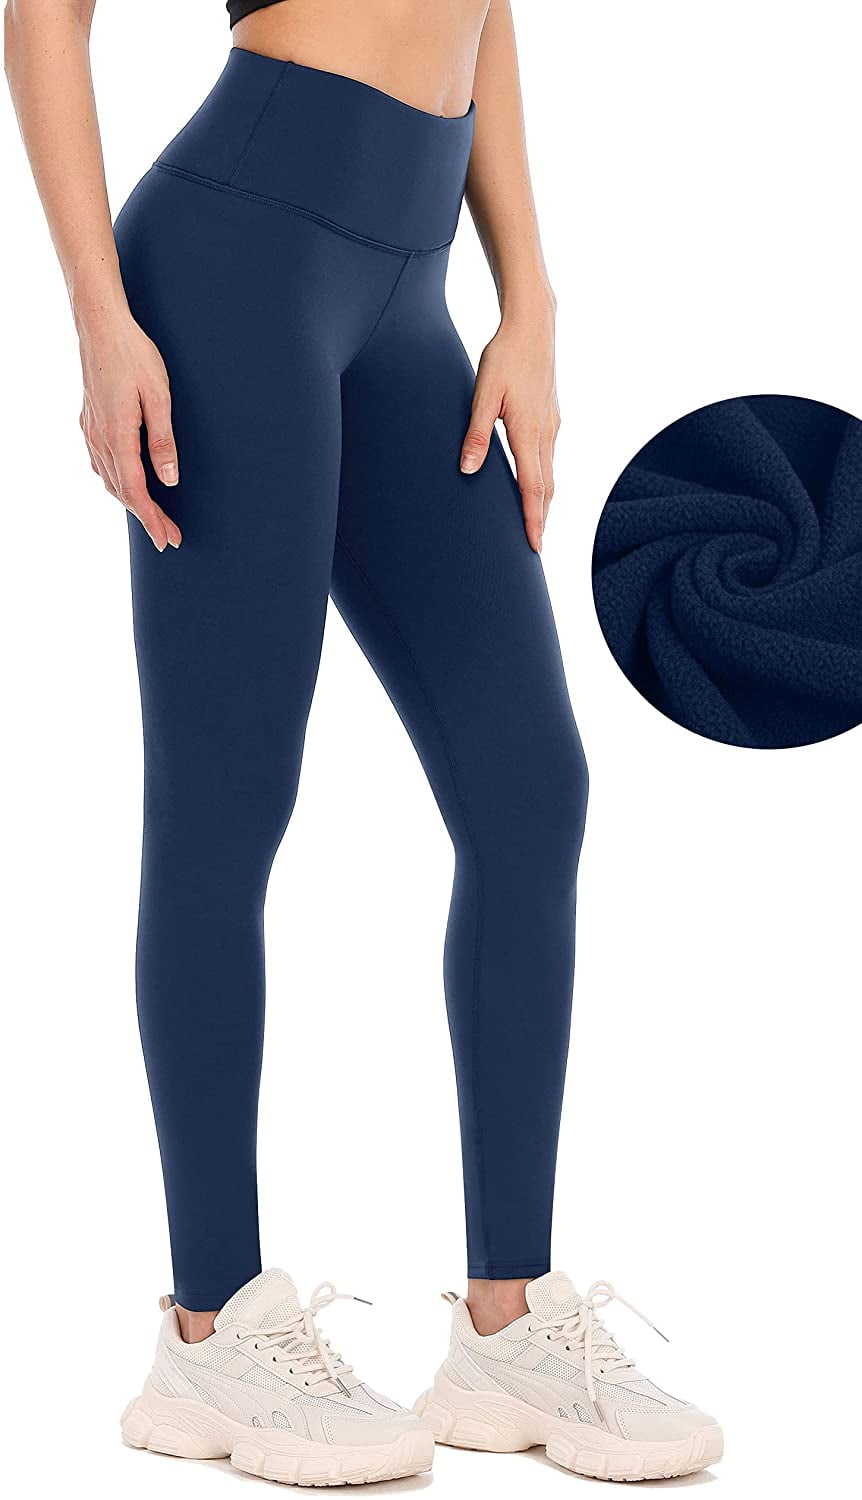 Charmo Fleece Lined Leggings Women Winter Thermal Insulated Leggings High  Waist Workout Yoga Pants with Pockets 